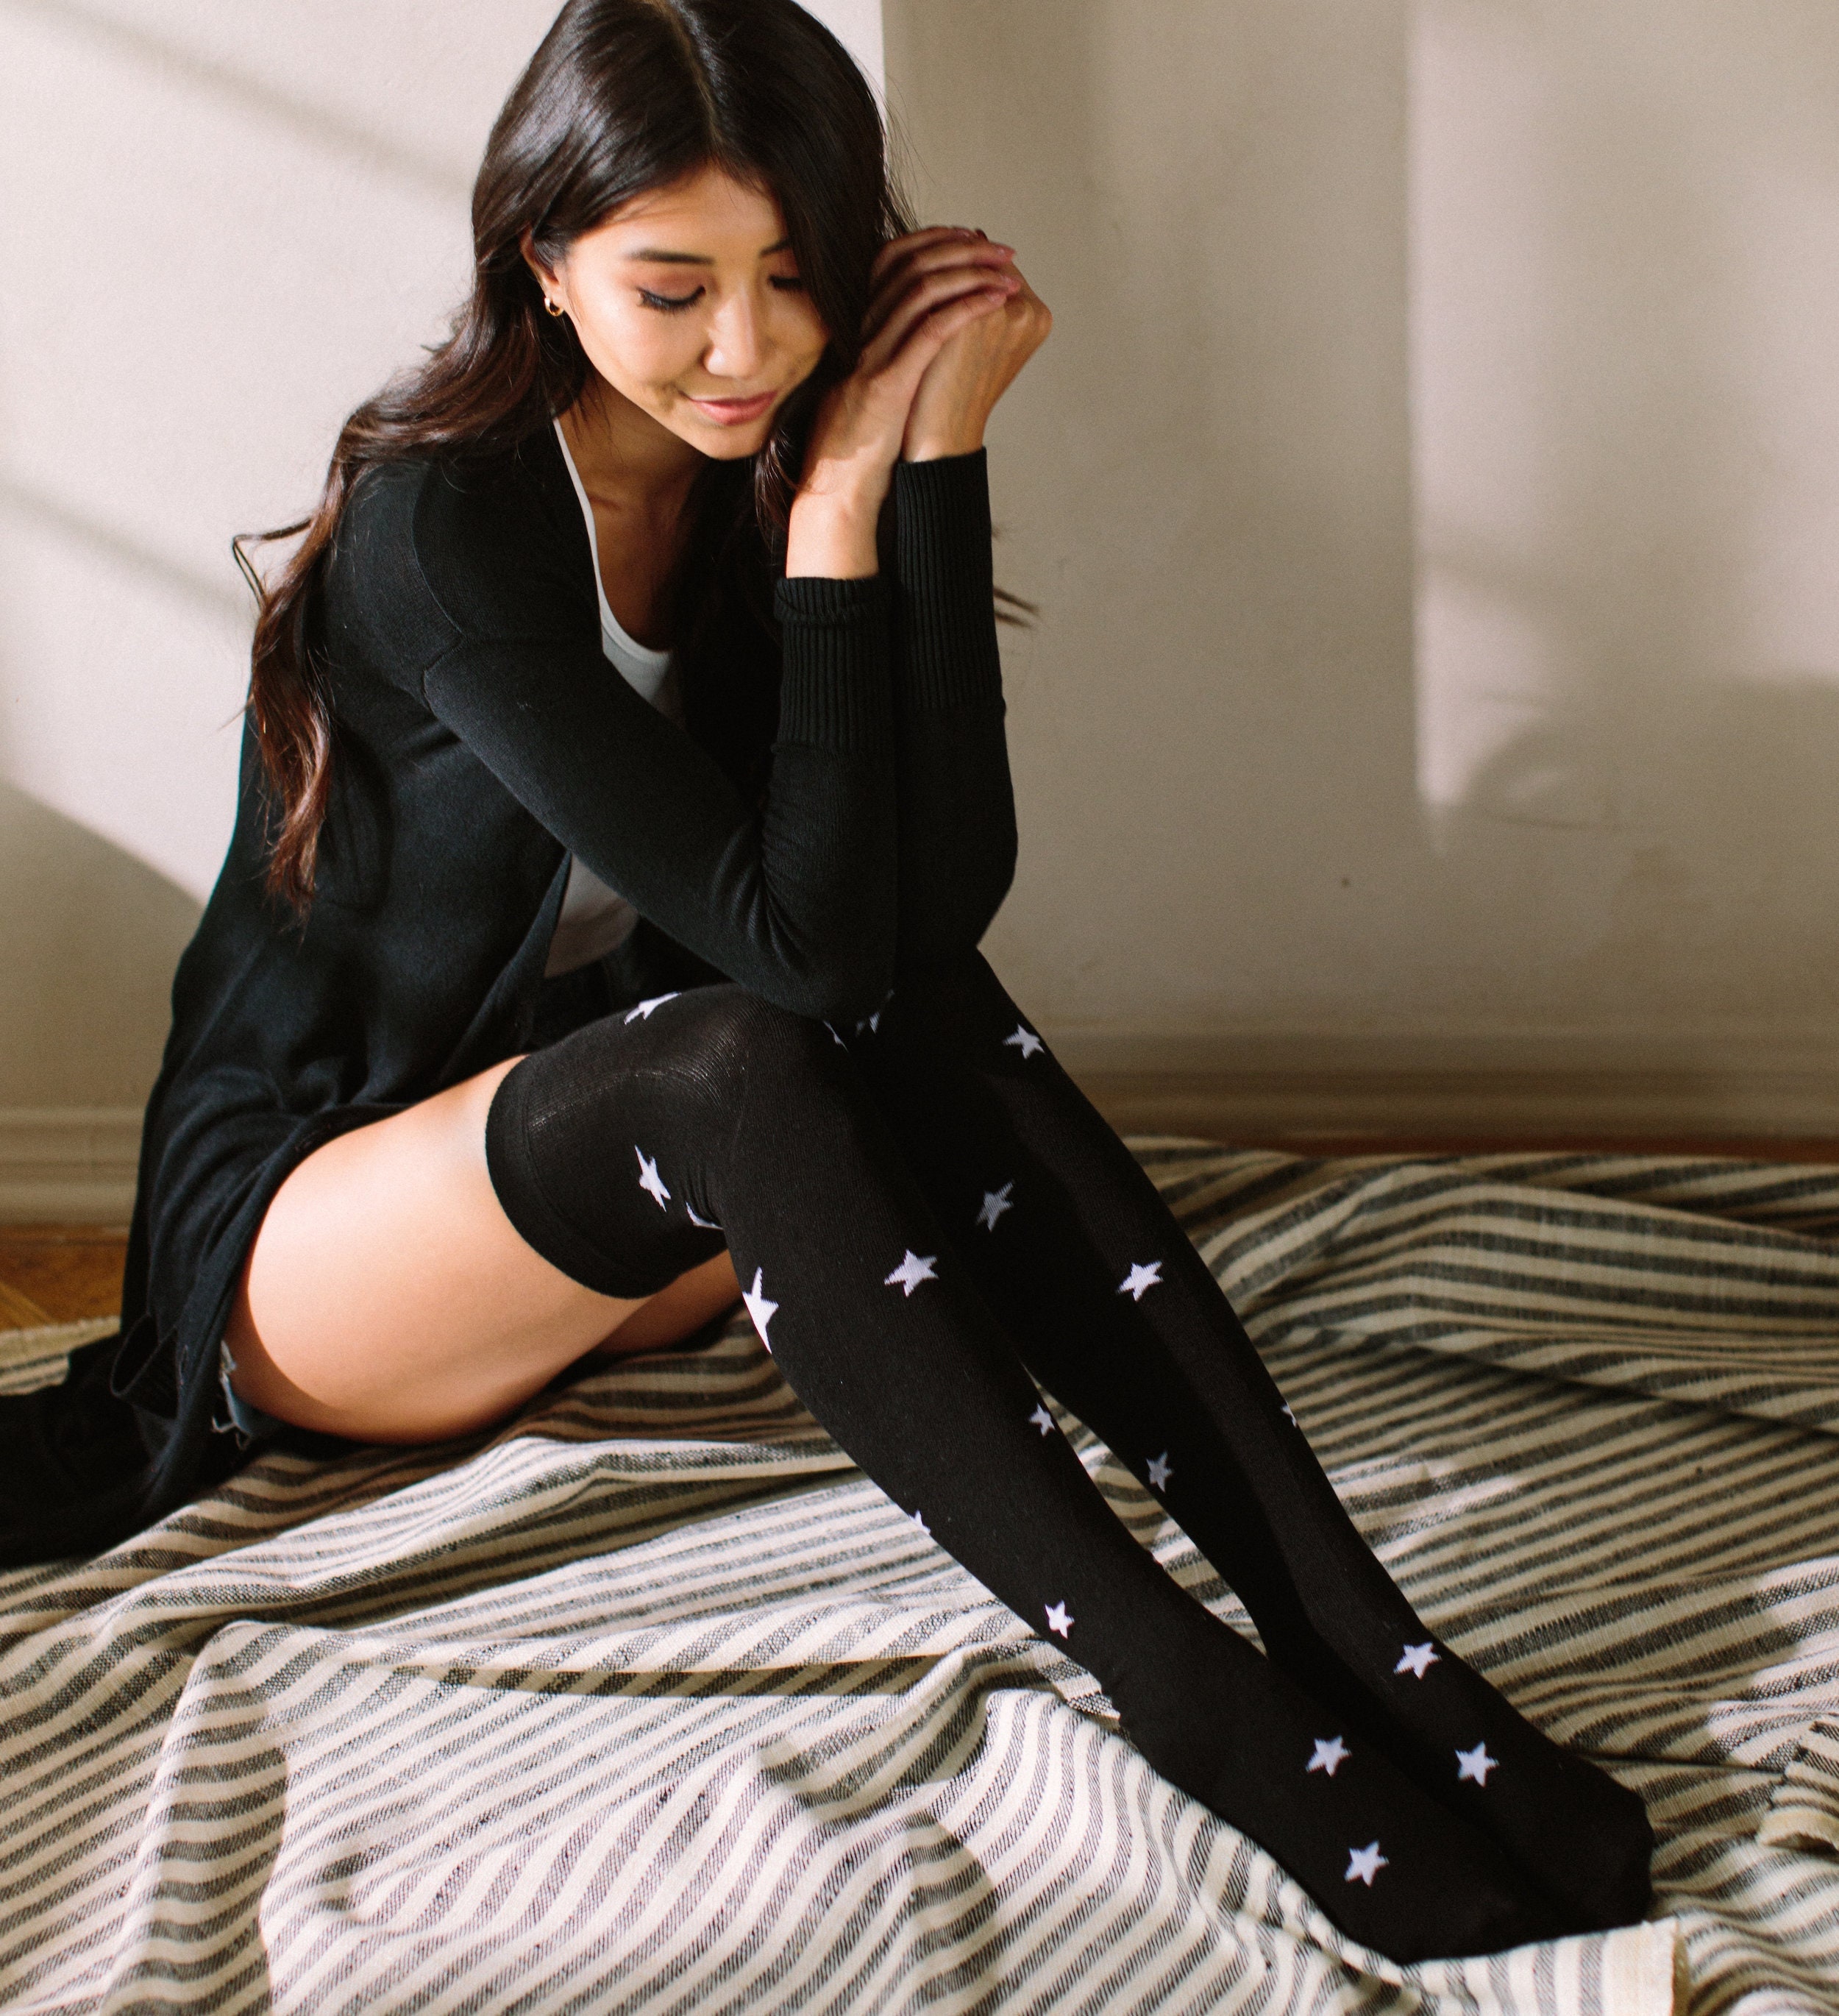 abigail dela paz recommends Babes In Thigh High Socks